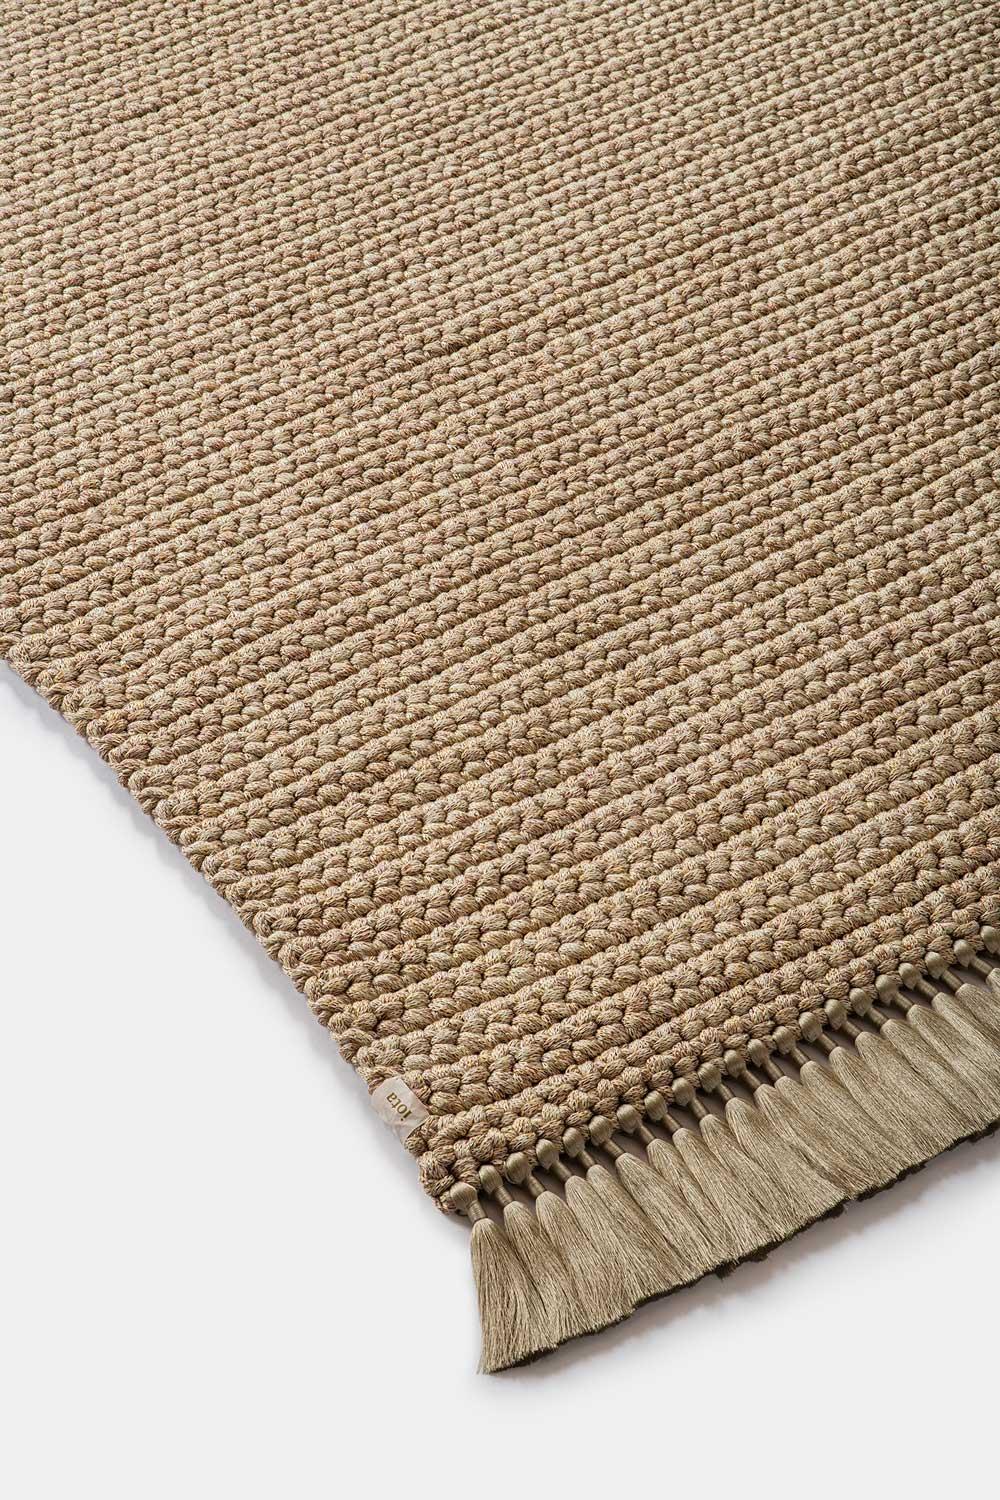 Handmade Crochet 200x300 cm Thick Rug in Golden Beige Bordeaux  In New Condition For Sale In Tel Aviv, IL